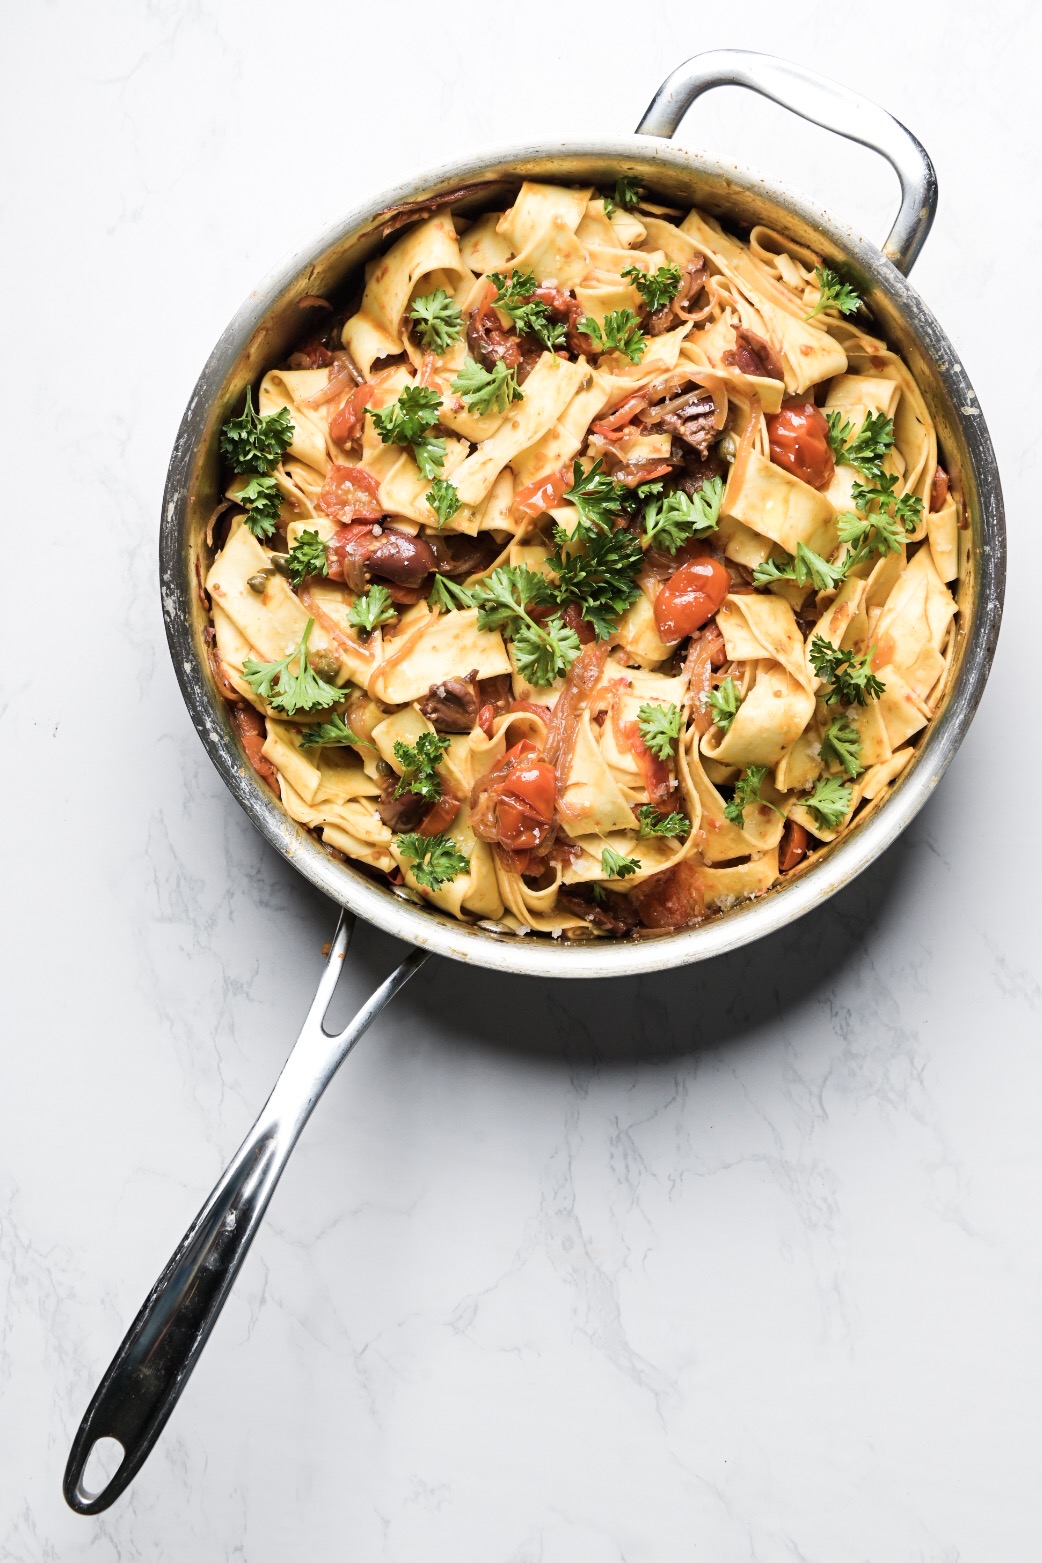 Pappardelle with harissa, olives, capers and tomatoes